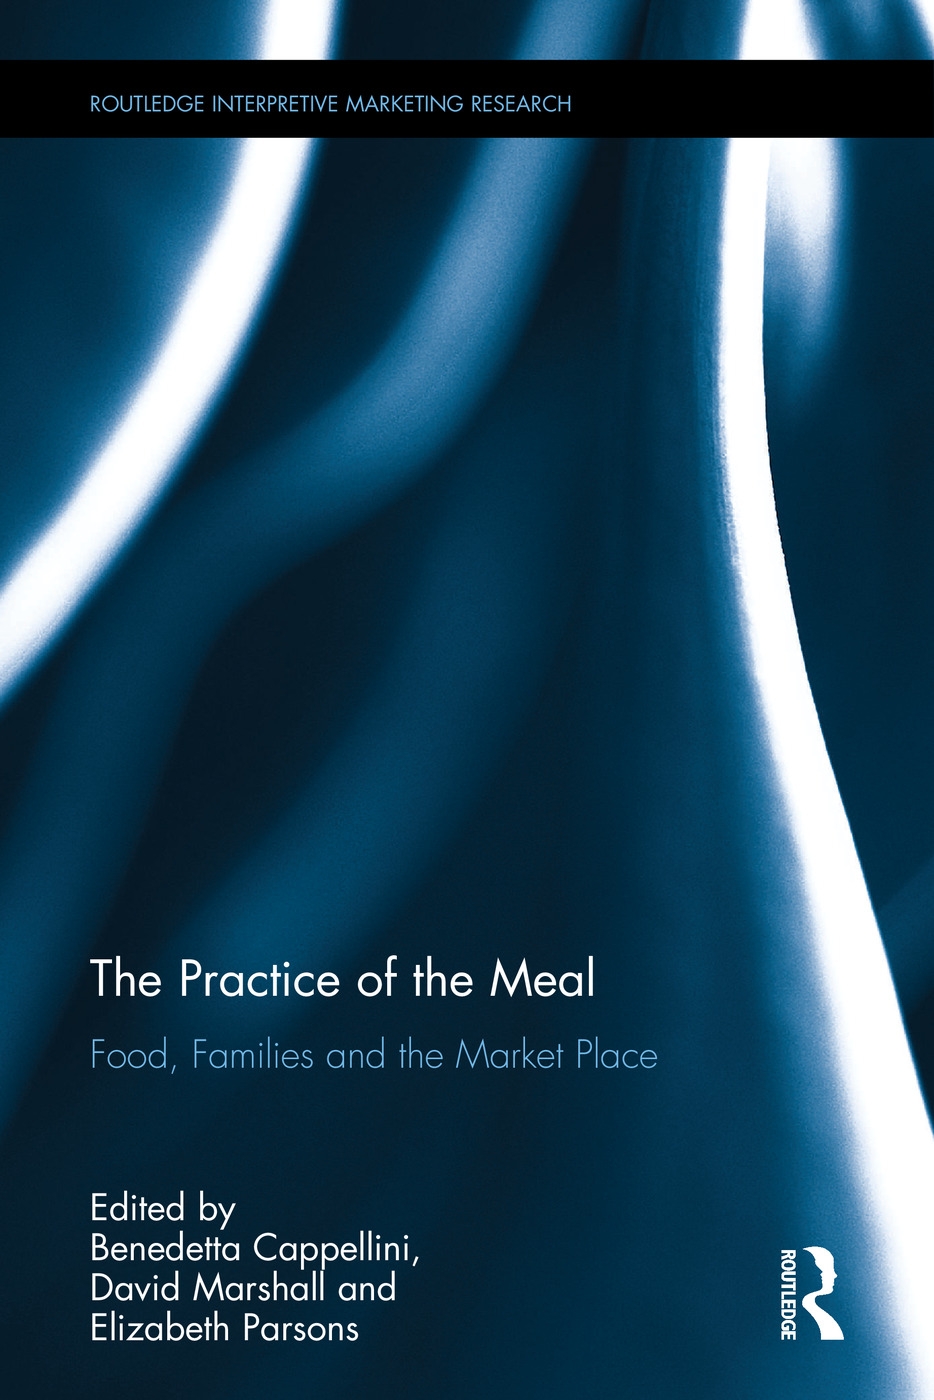 The Practice of the Meal: Food, Families and the Market Place